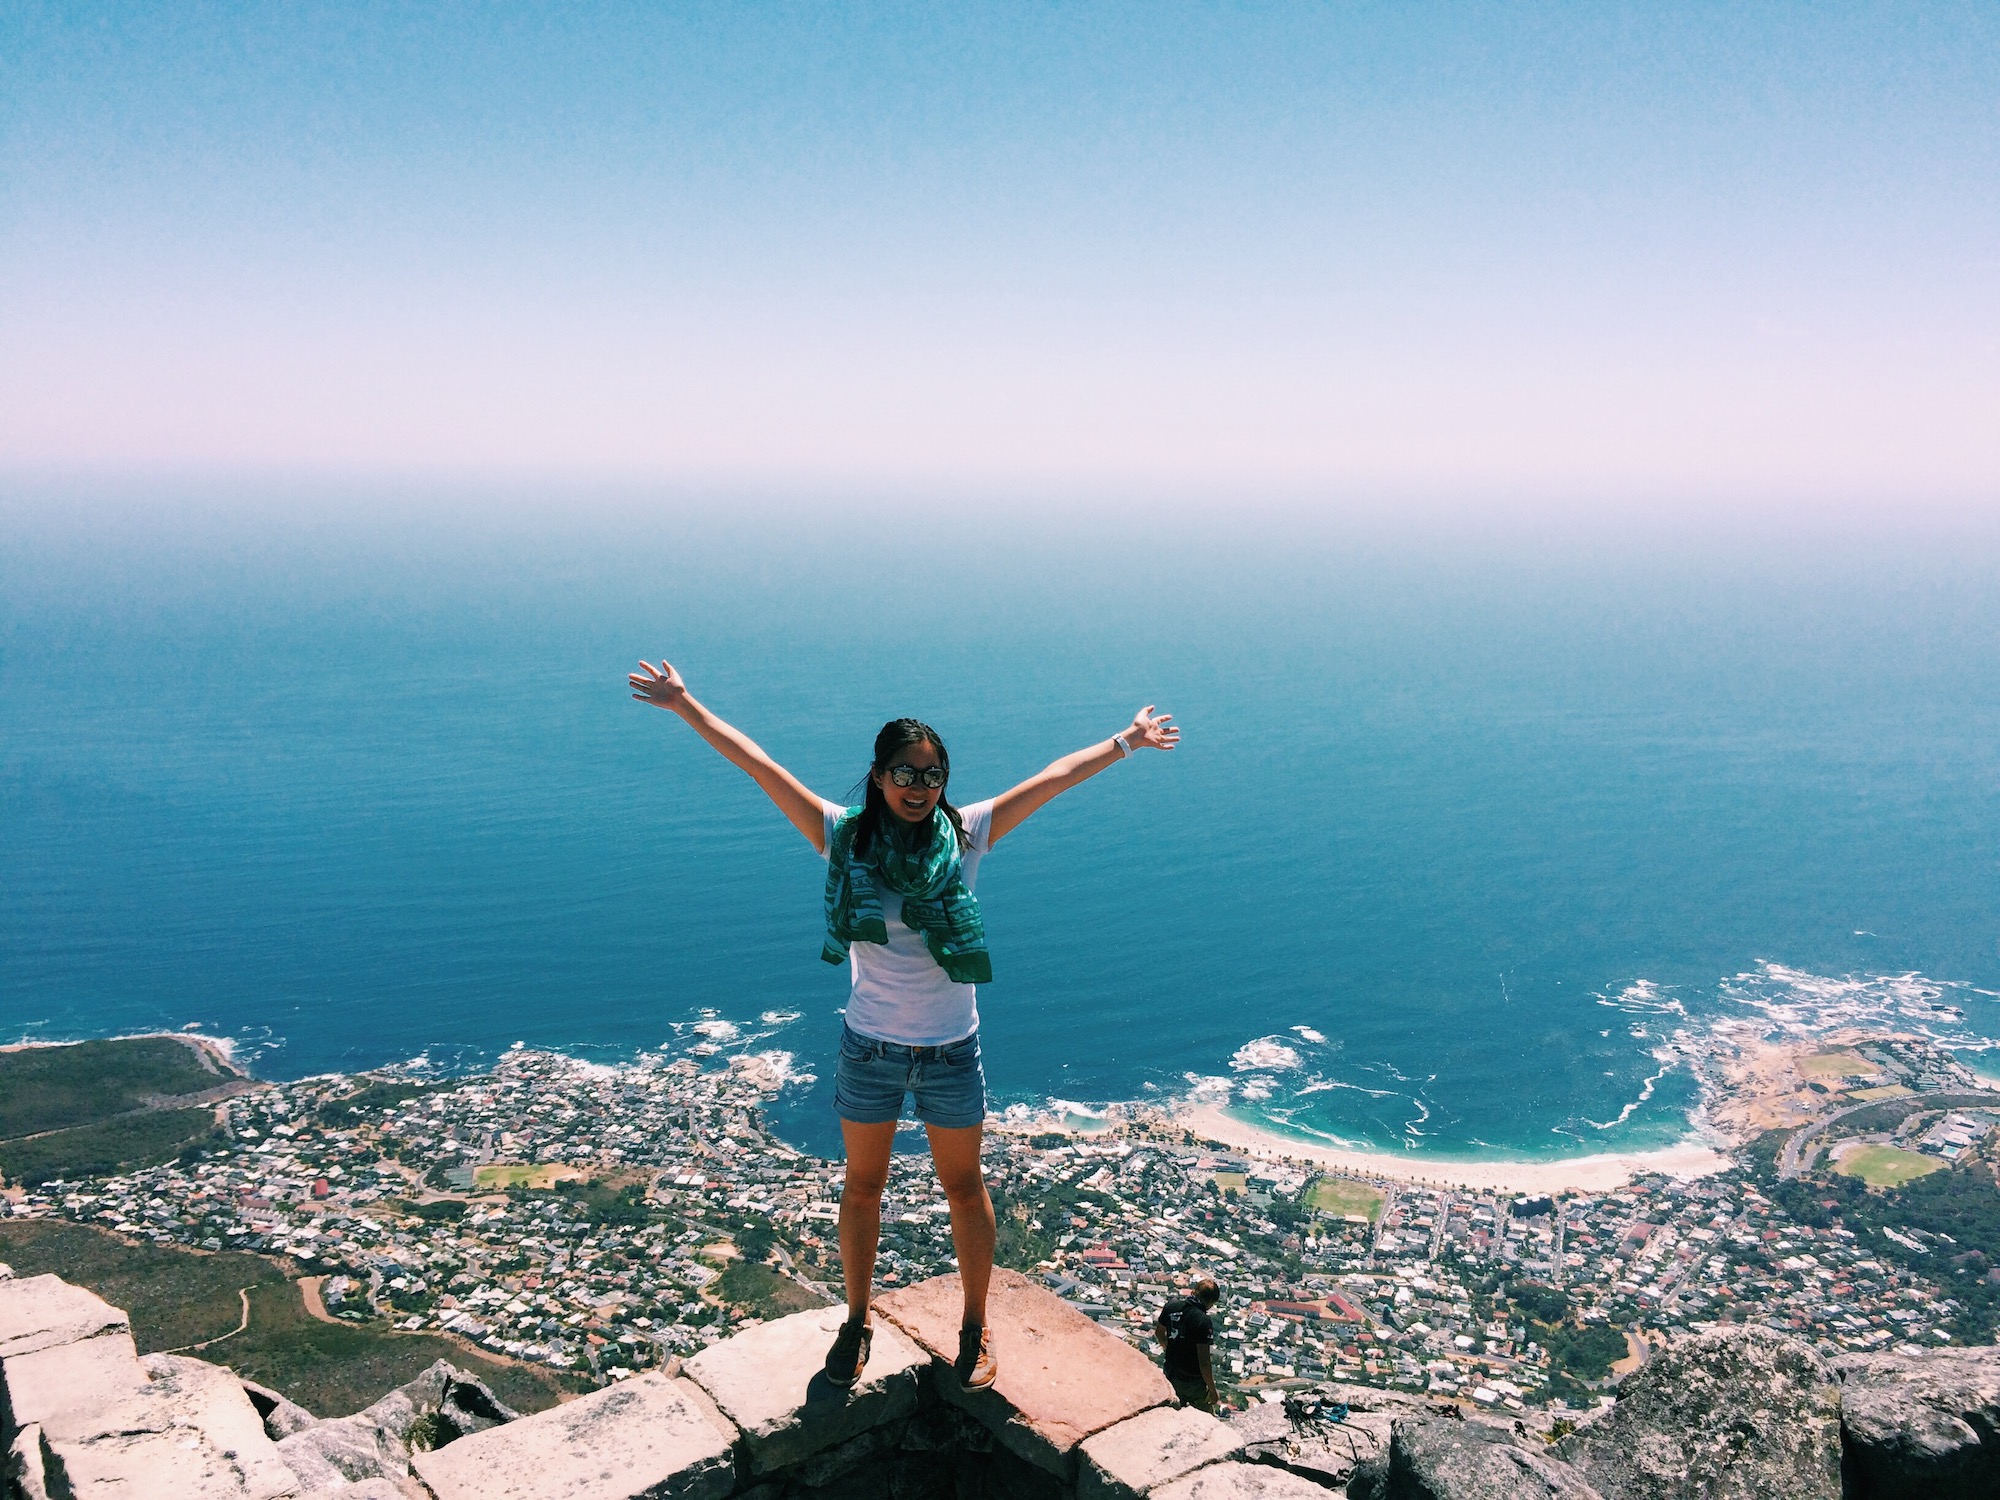 on top of table mountain in cape town, south Africa